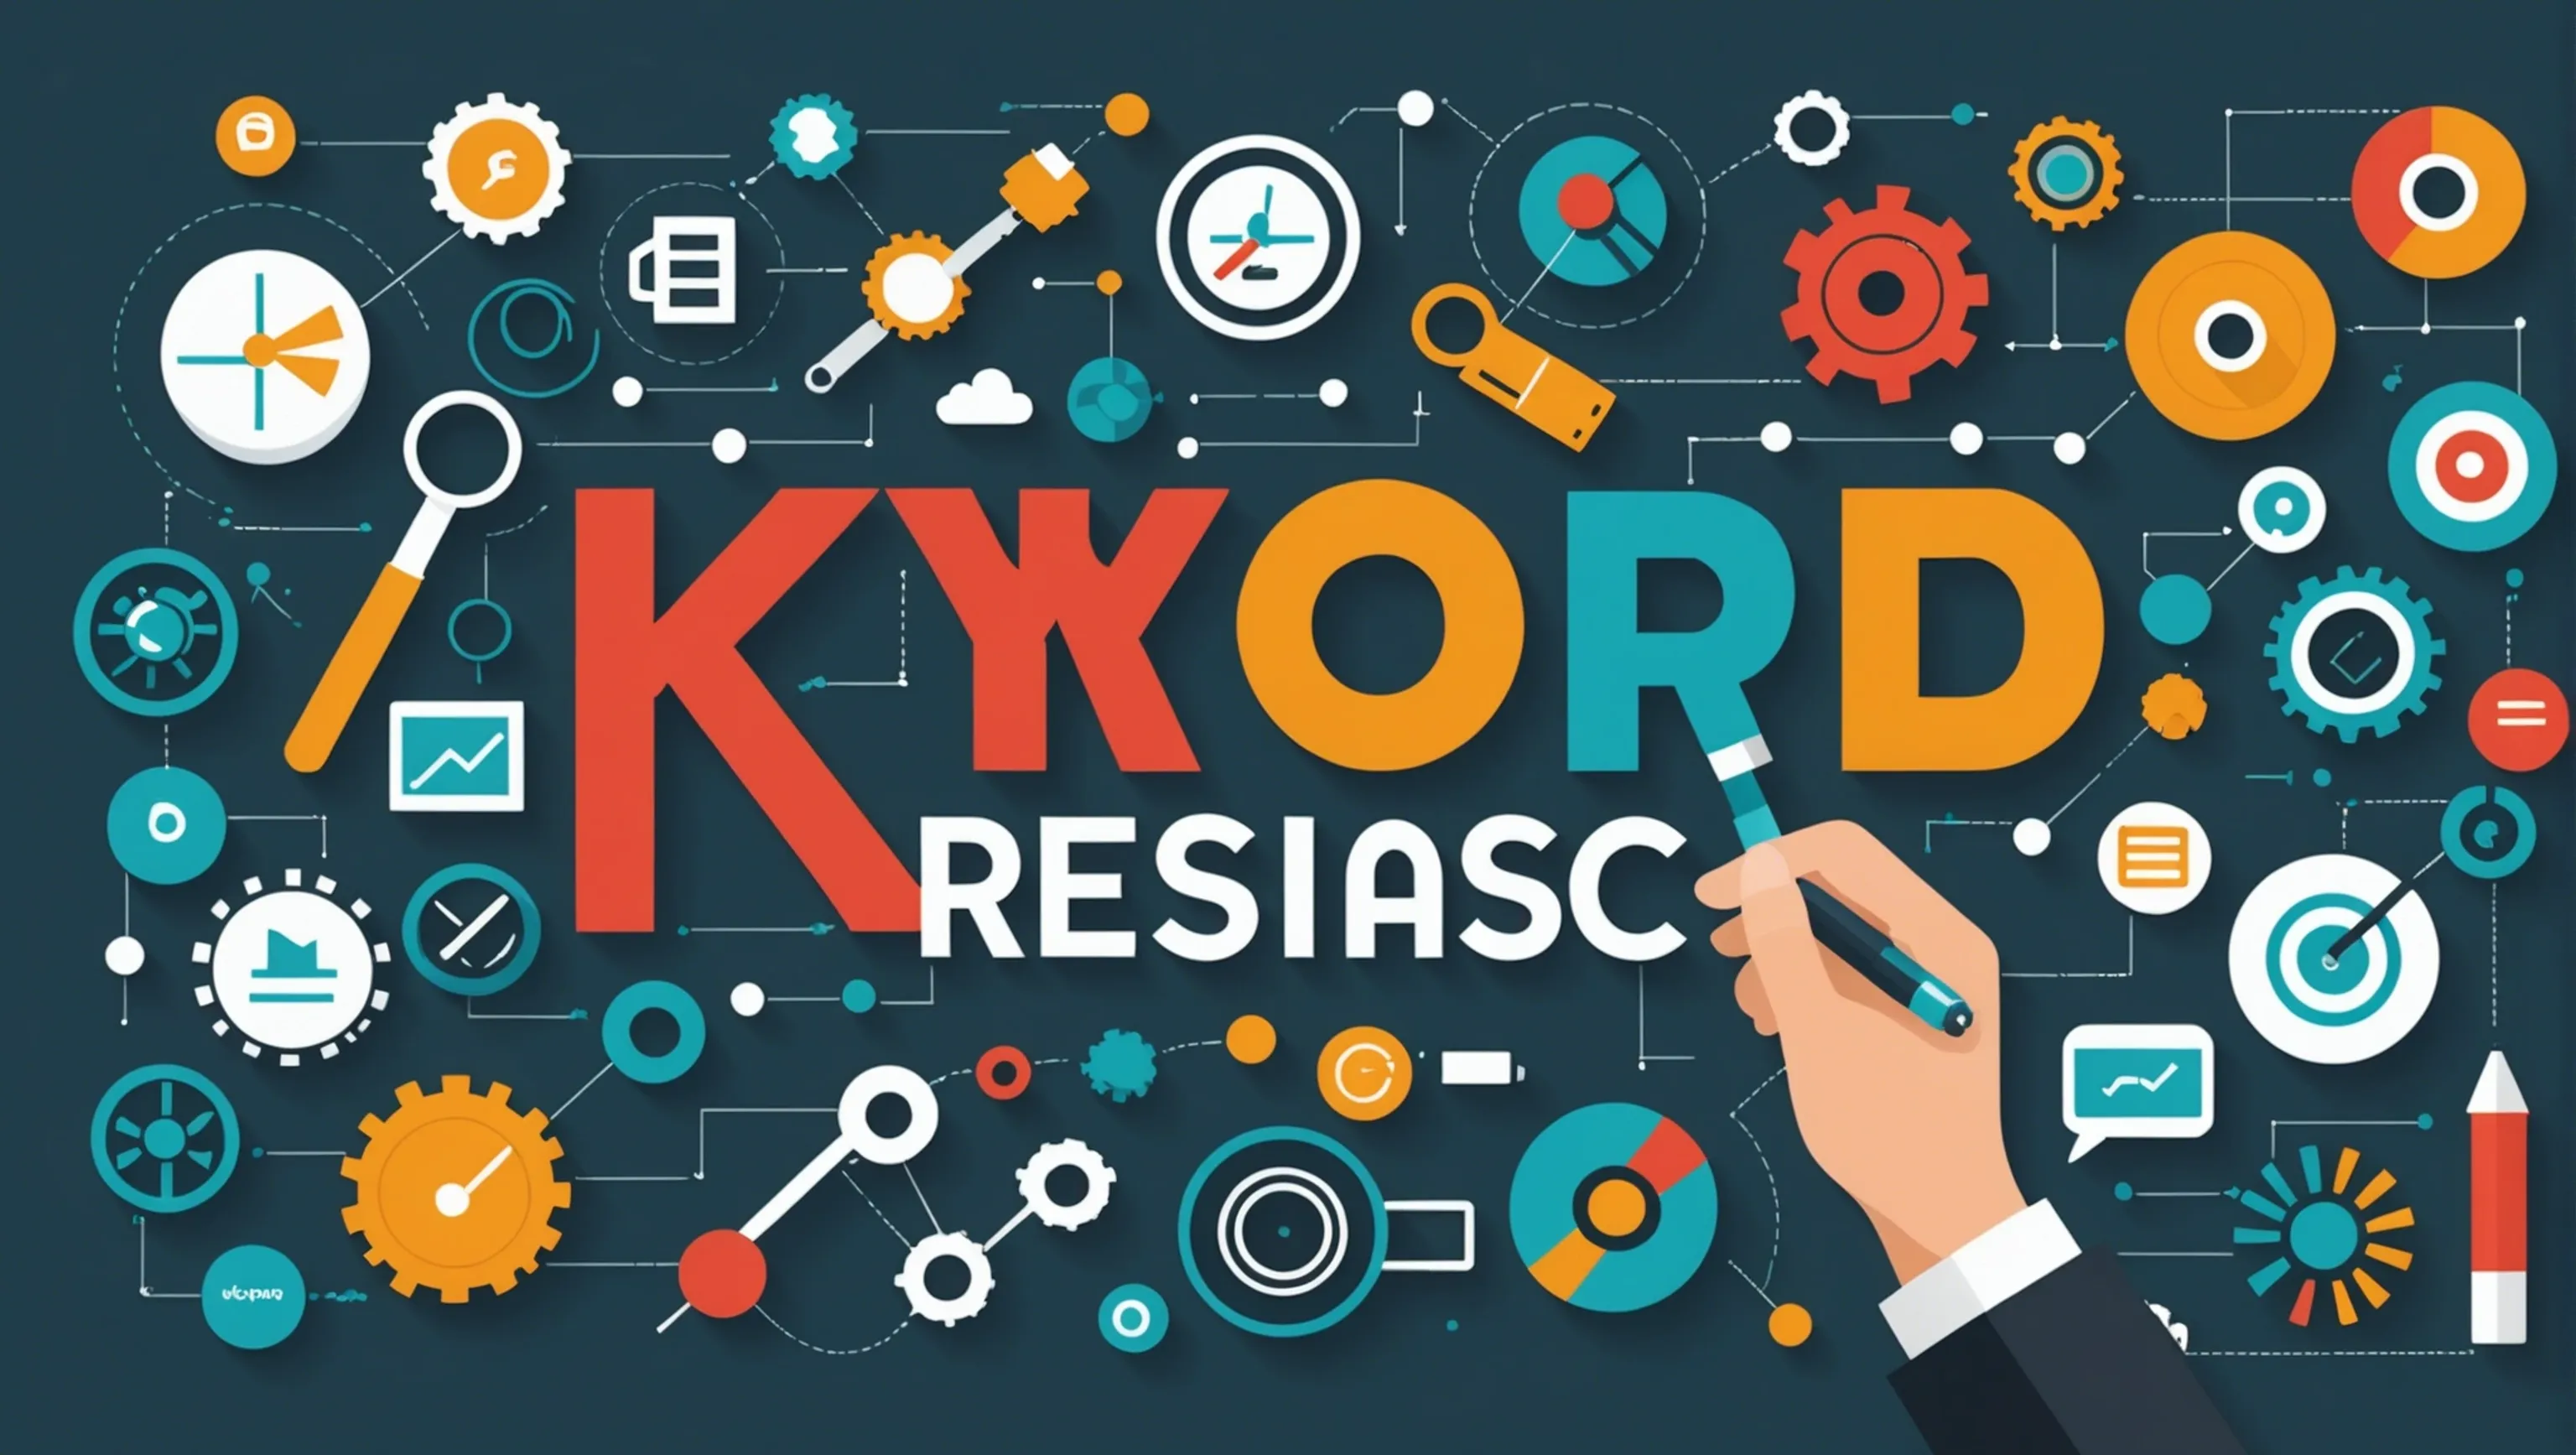 Tools and techniques for keyword research